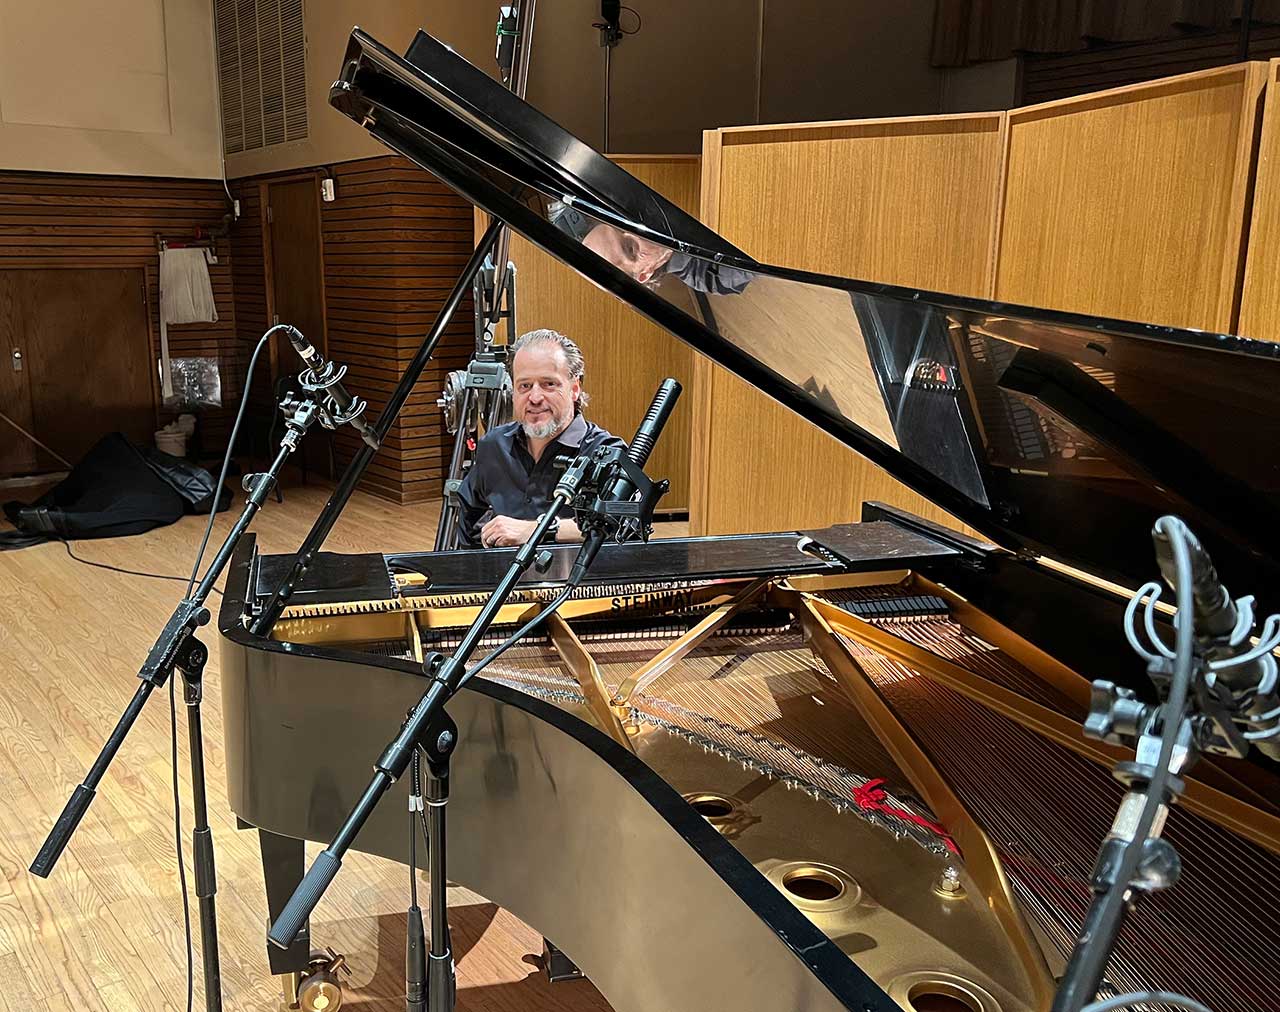 Paul Cardall at Piano with Sanken 100K Mics at Five/Four Productions